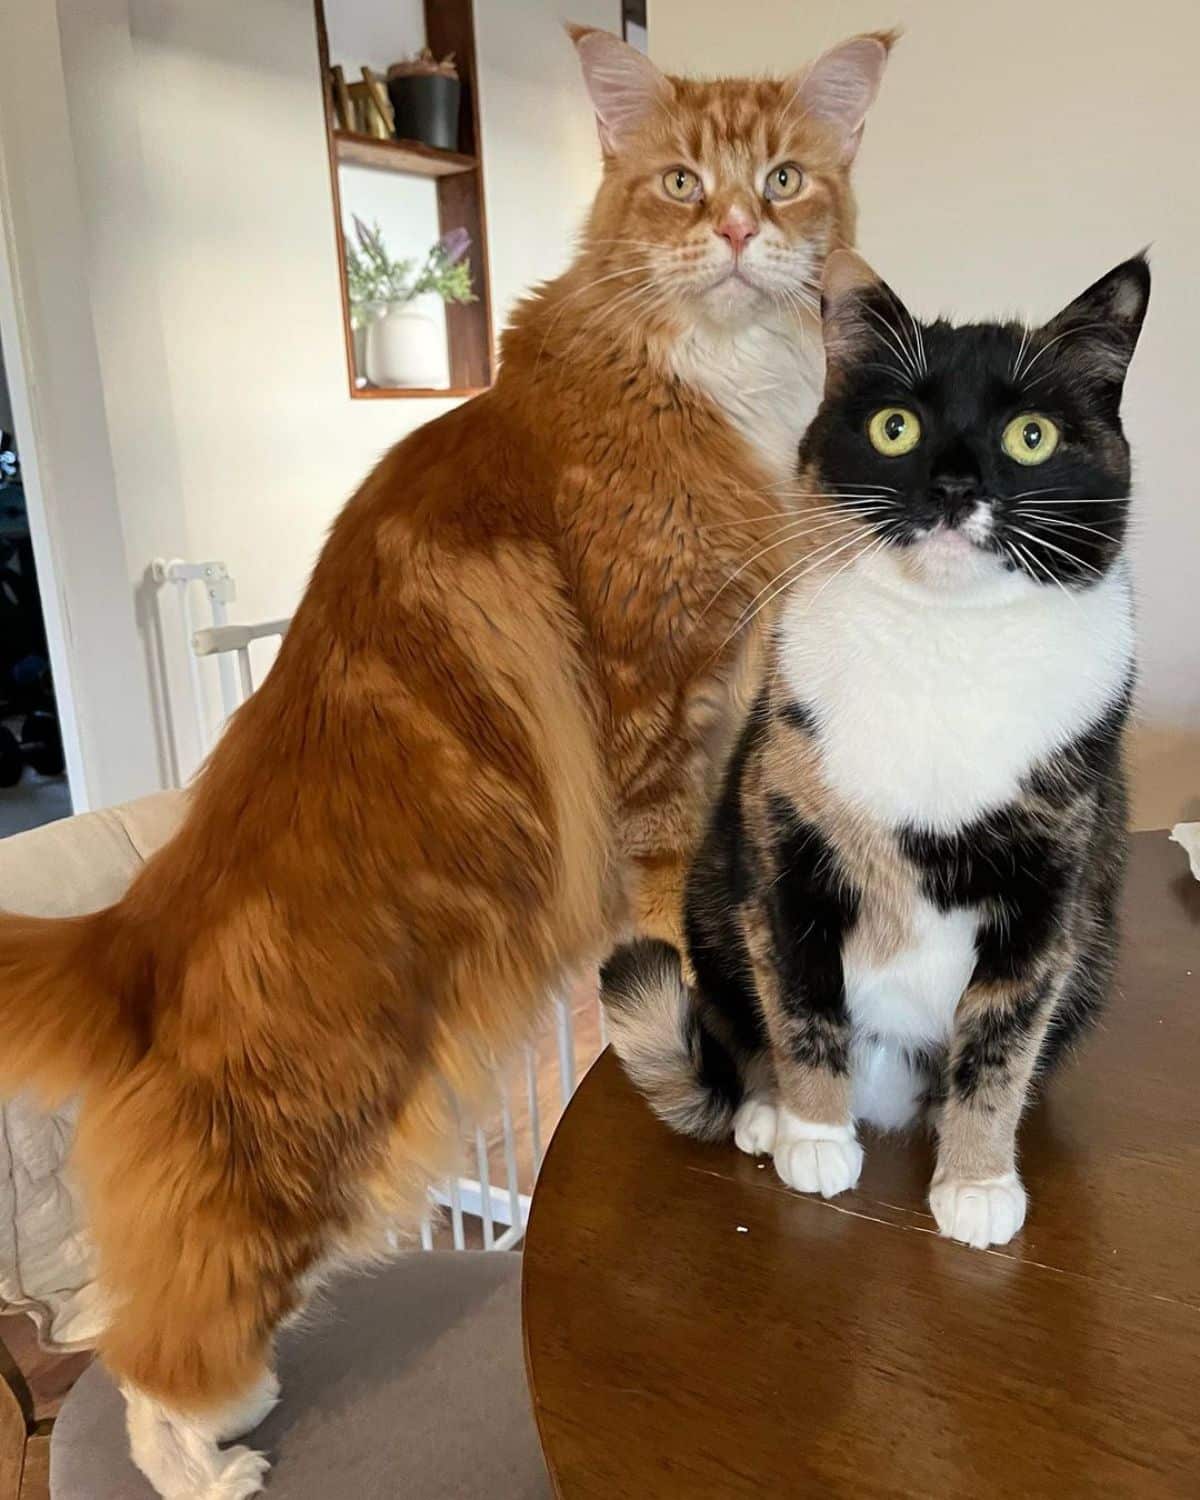 A ginger maine coon and a calico cat next to each other on a table.